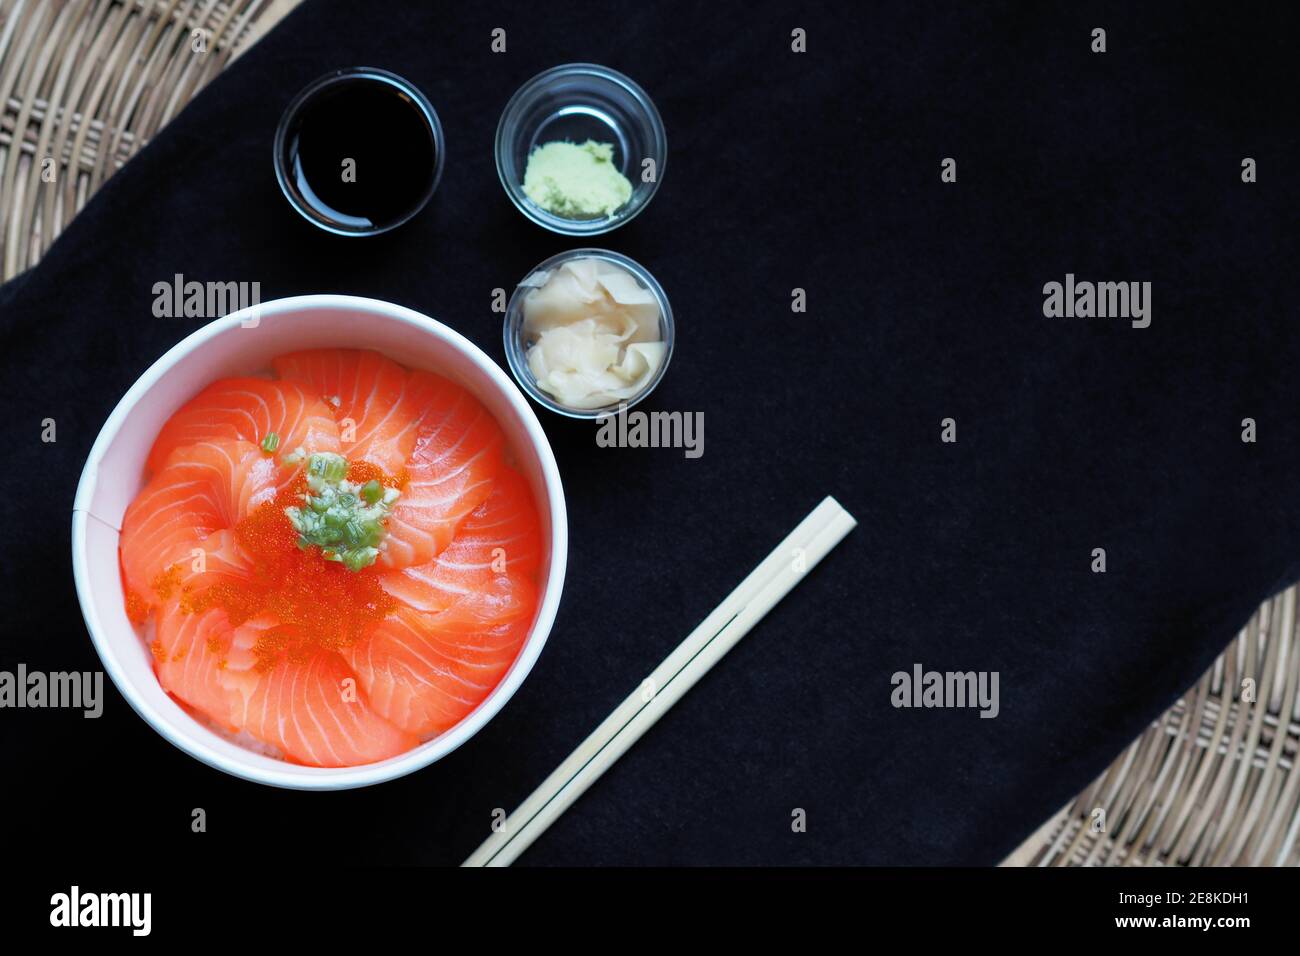 Top view and focus to Salmon with Japanese rice or Salmon Ikura Don in paper dish from delivery restaurant on black Table cloths Stock Photo